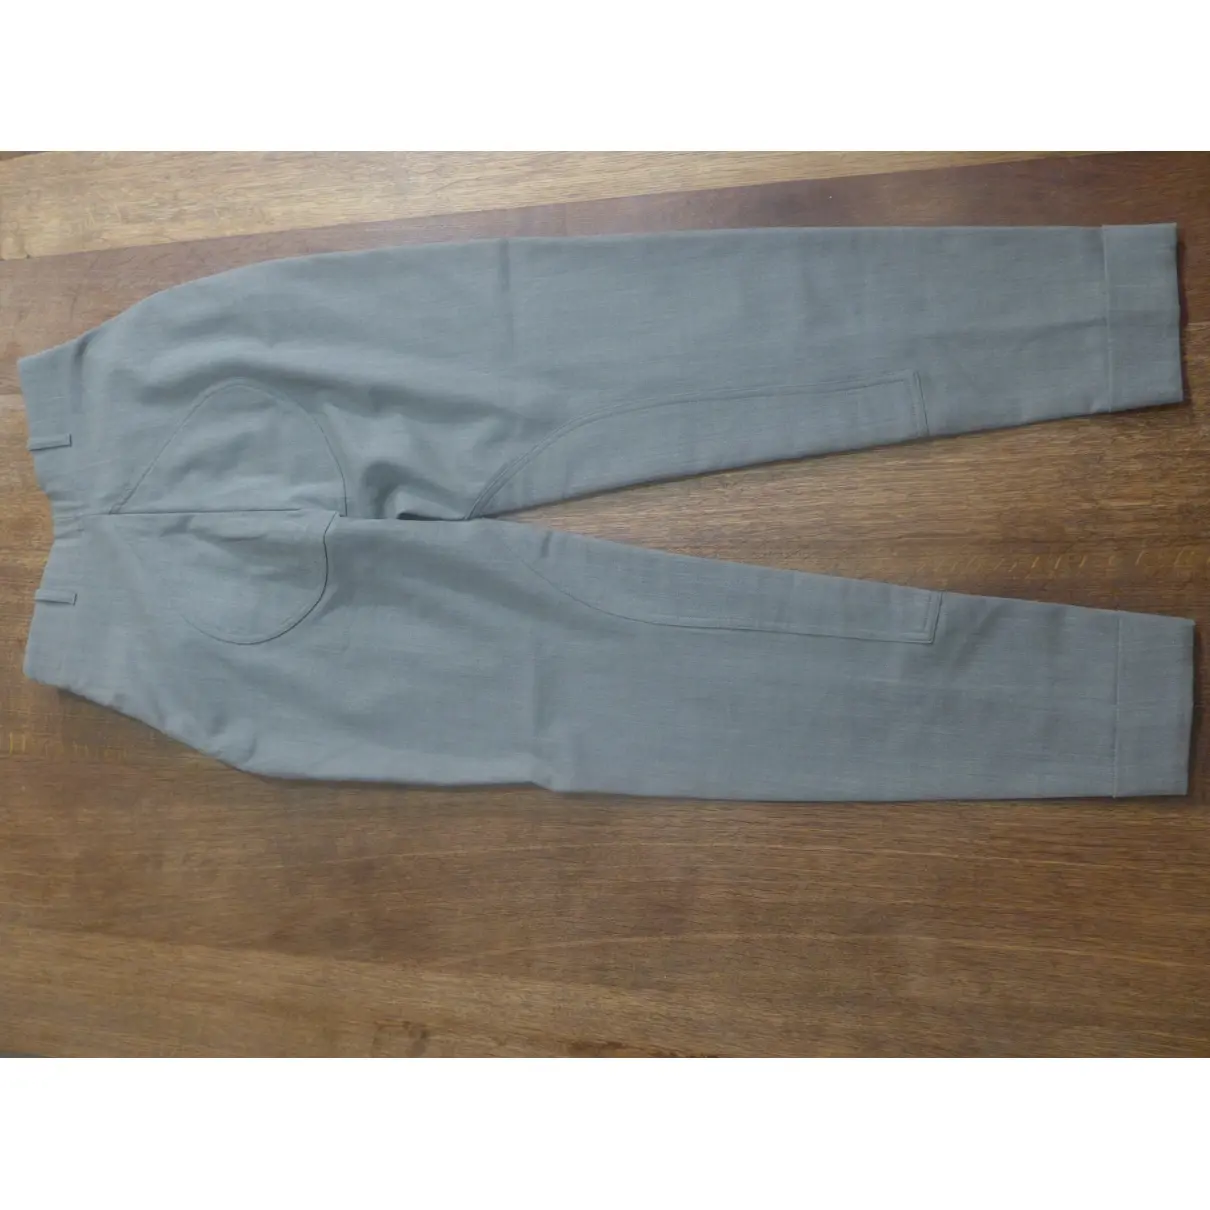 Hermès Wool trousers for sale